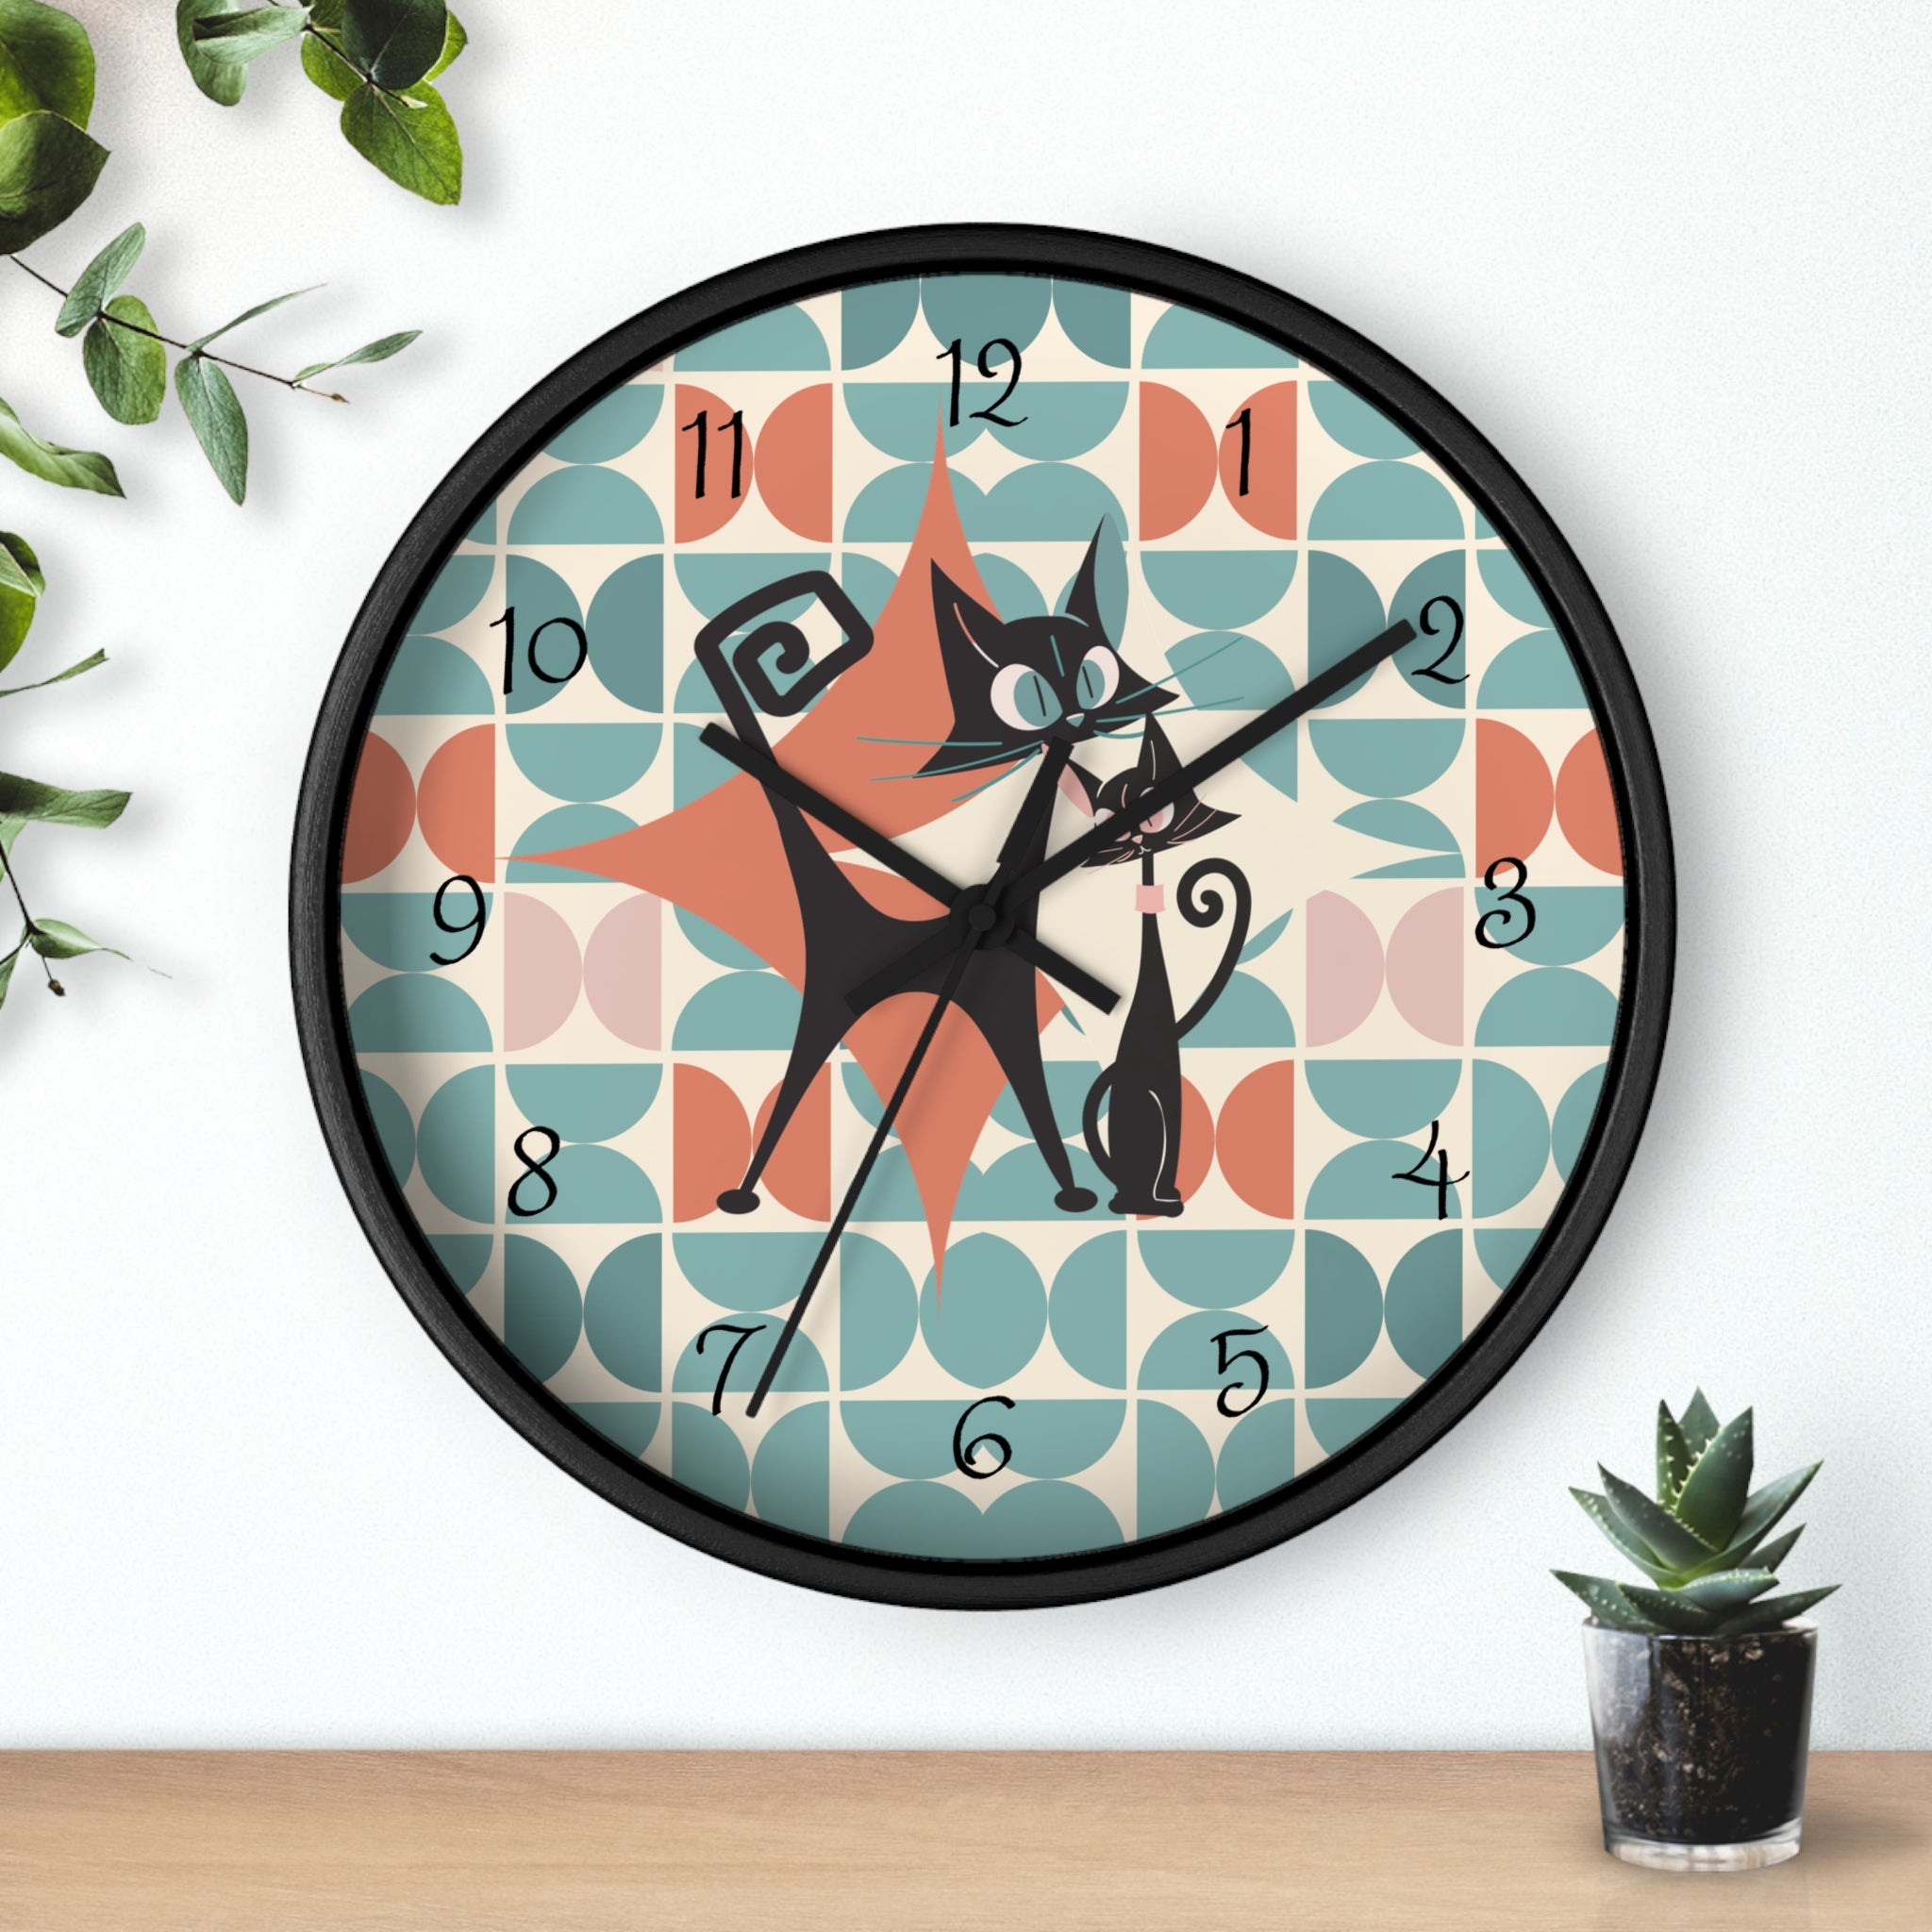 Kitchen Clock, Atomic Cat Retro Mid Century Modern Style With Scandinavian Designed Geometric Shapes, 50s Wall Clock For Cat Lovers